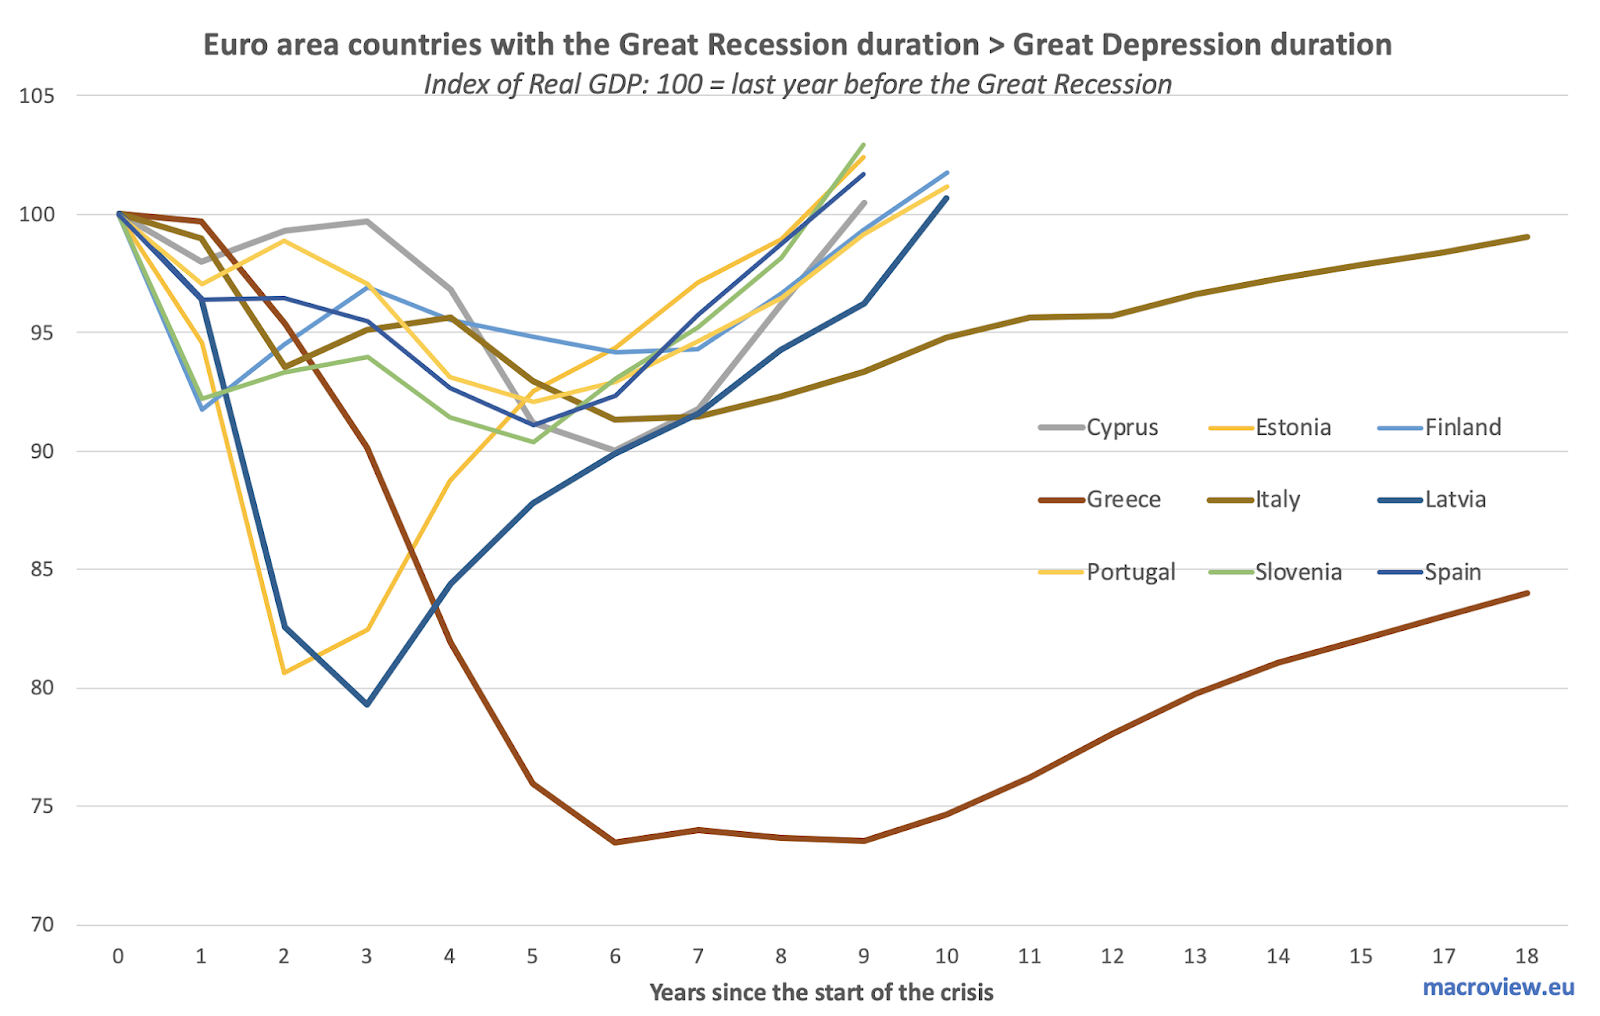 Great Depression Vs Great Recession Chart